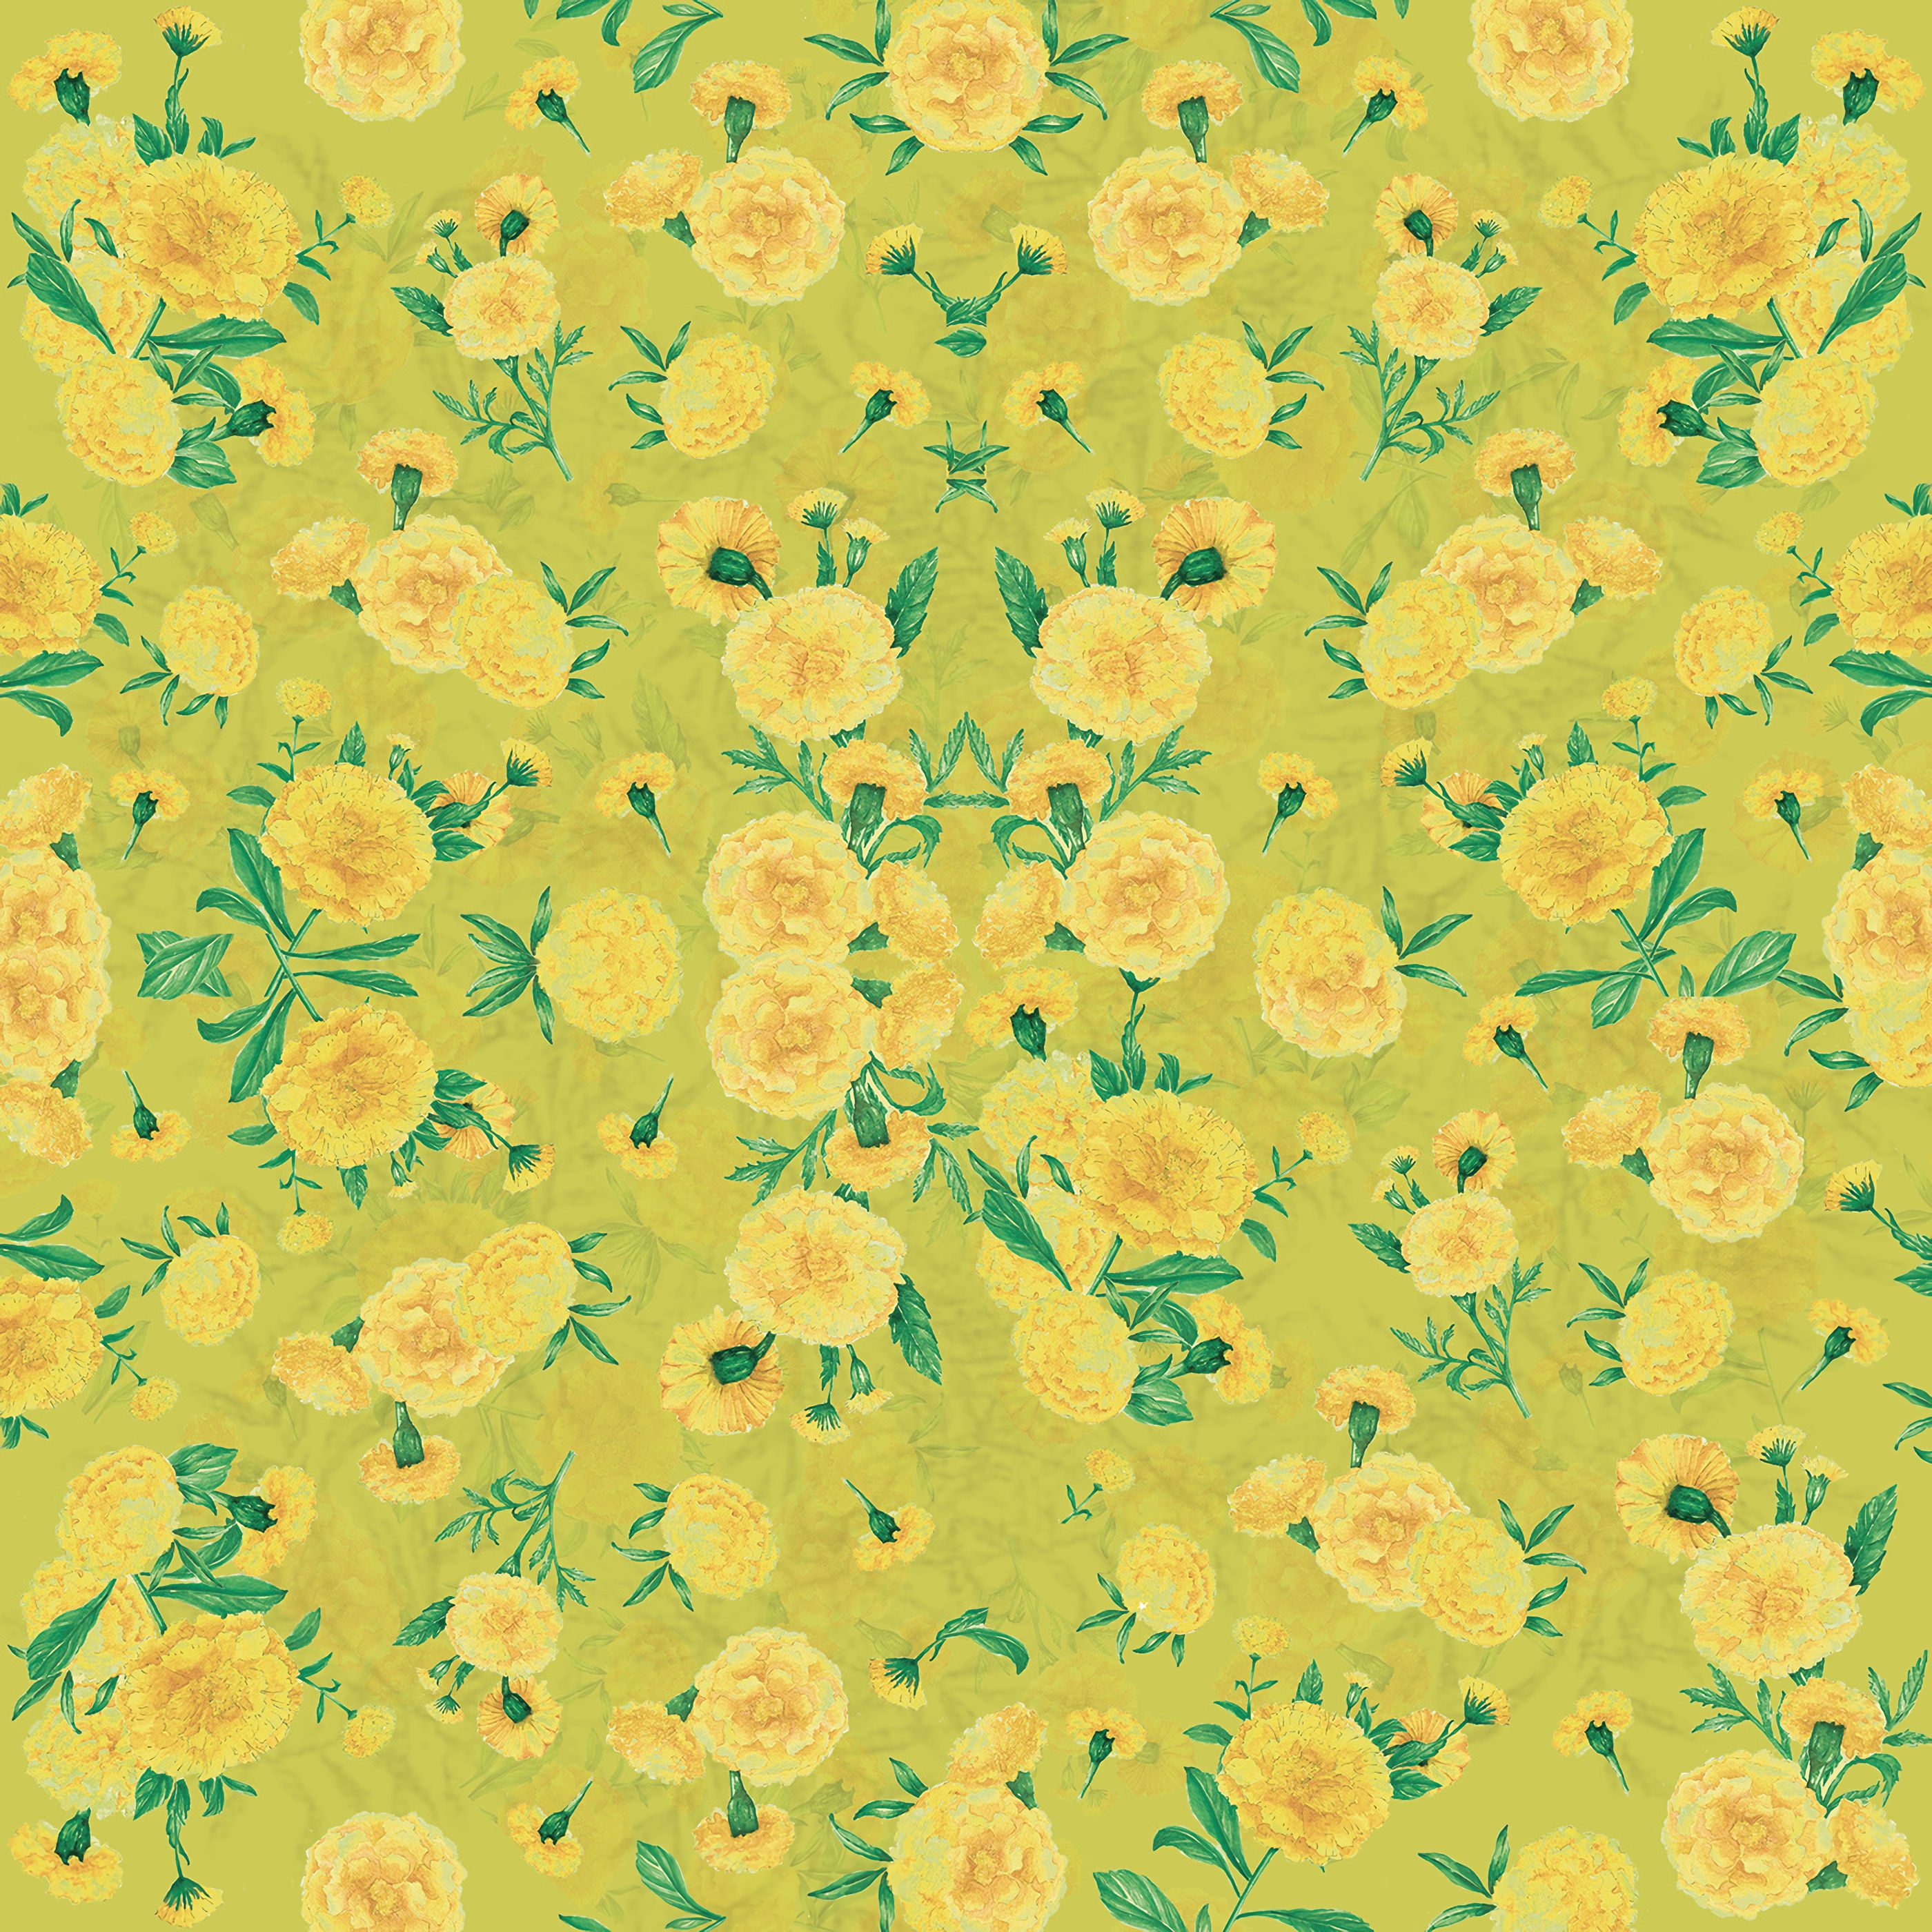 1920x1080 Background patterns, flowers, yellow, texture, textures